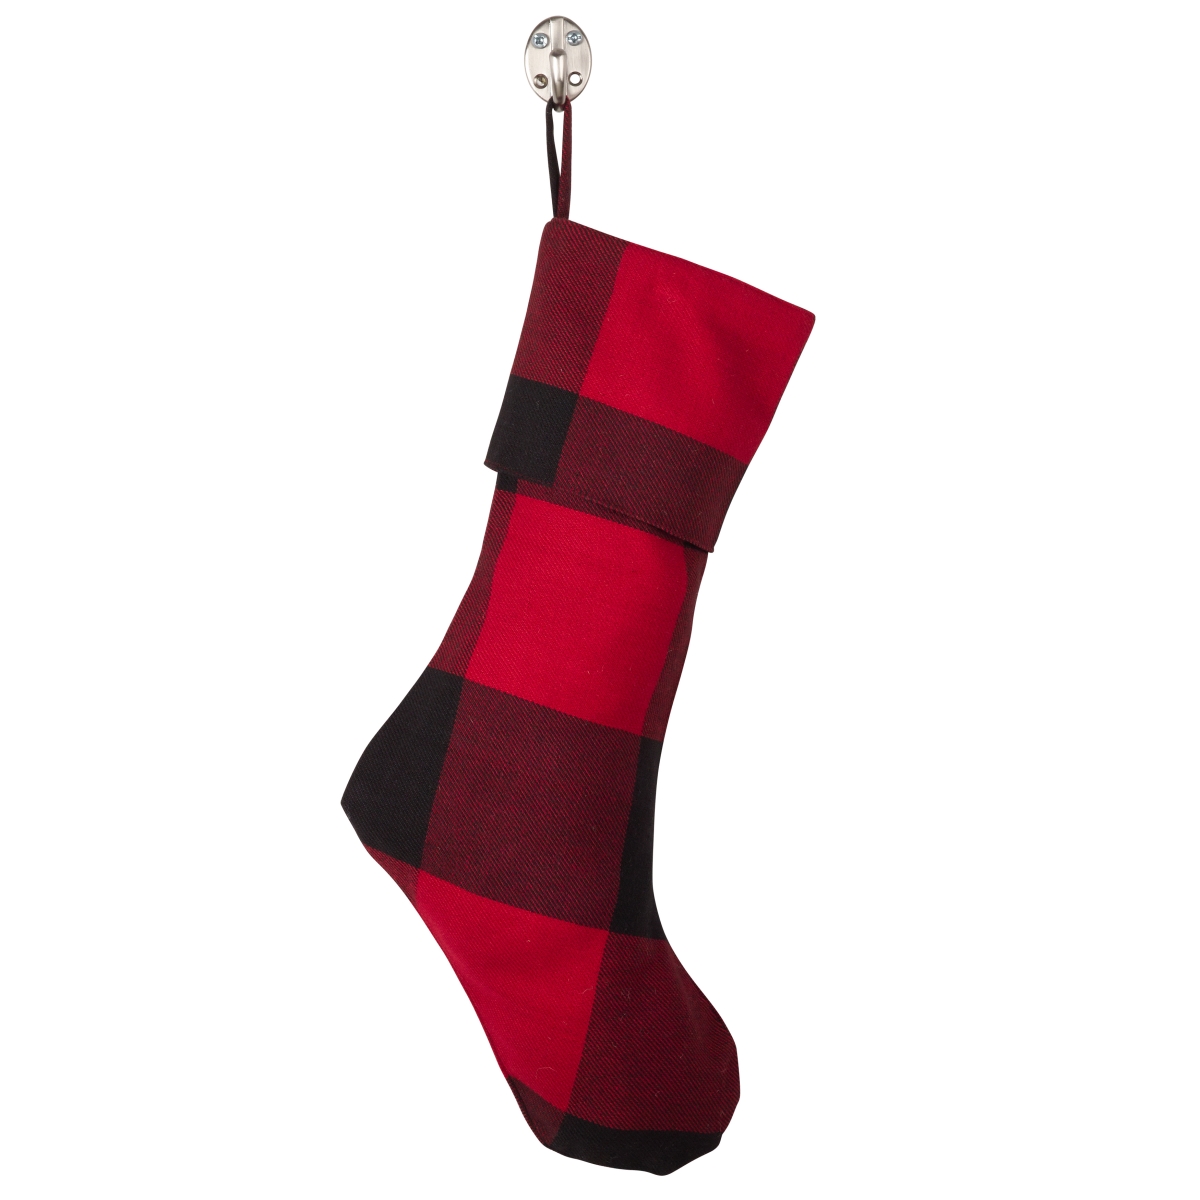 9025.r1319 13 X 19 In. Buffalo Plaid Design Decorative Cotton Christmas Stocking, Red